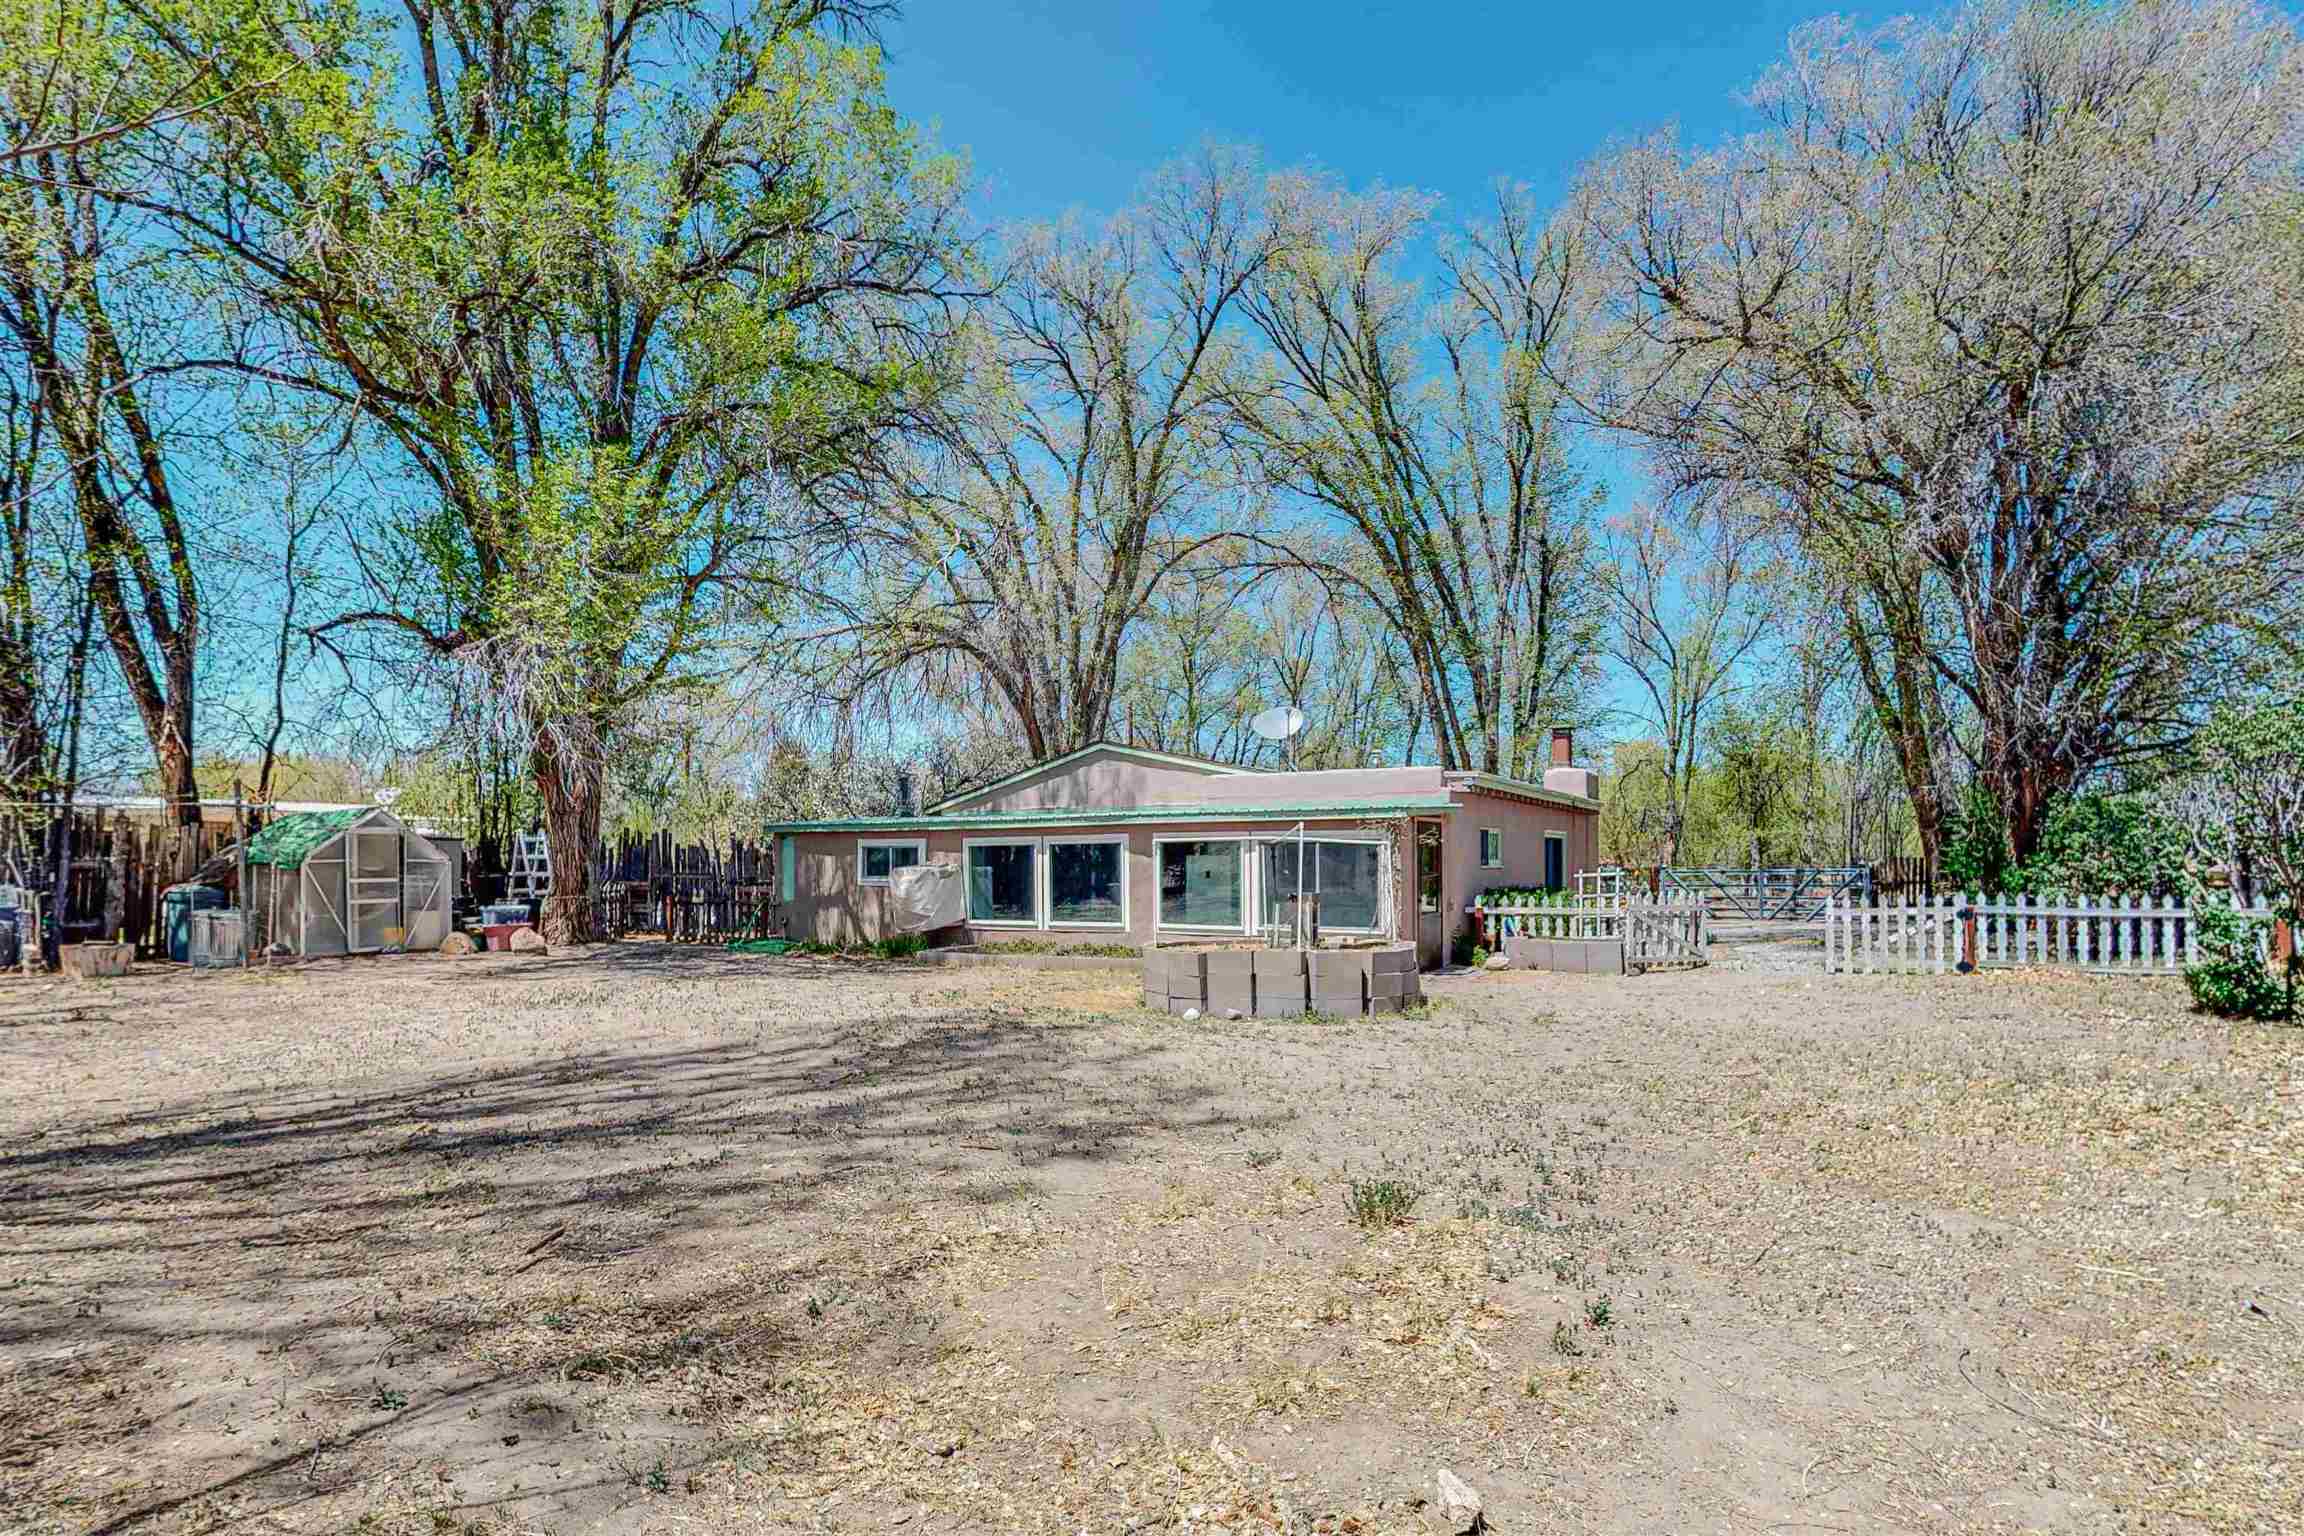 70 COUNTY RD 84B, Santa Fe, New Mexico 87506, 2 Bedrooms Bedrooms, ,2 BathroomsBathrooms,Residential,For Sale,70 COUNTY RD 84B,202201500